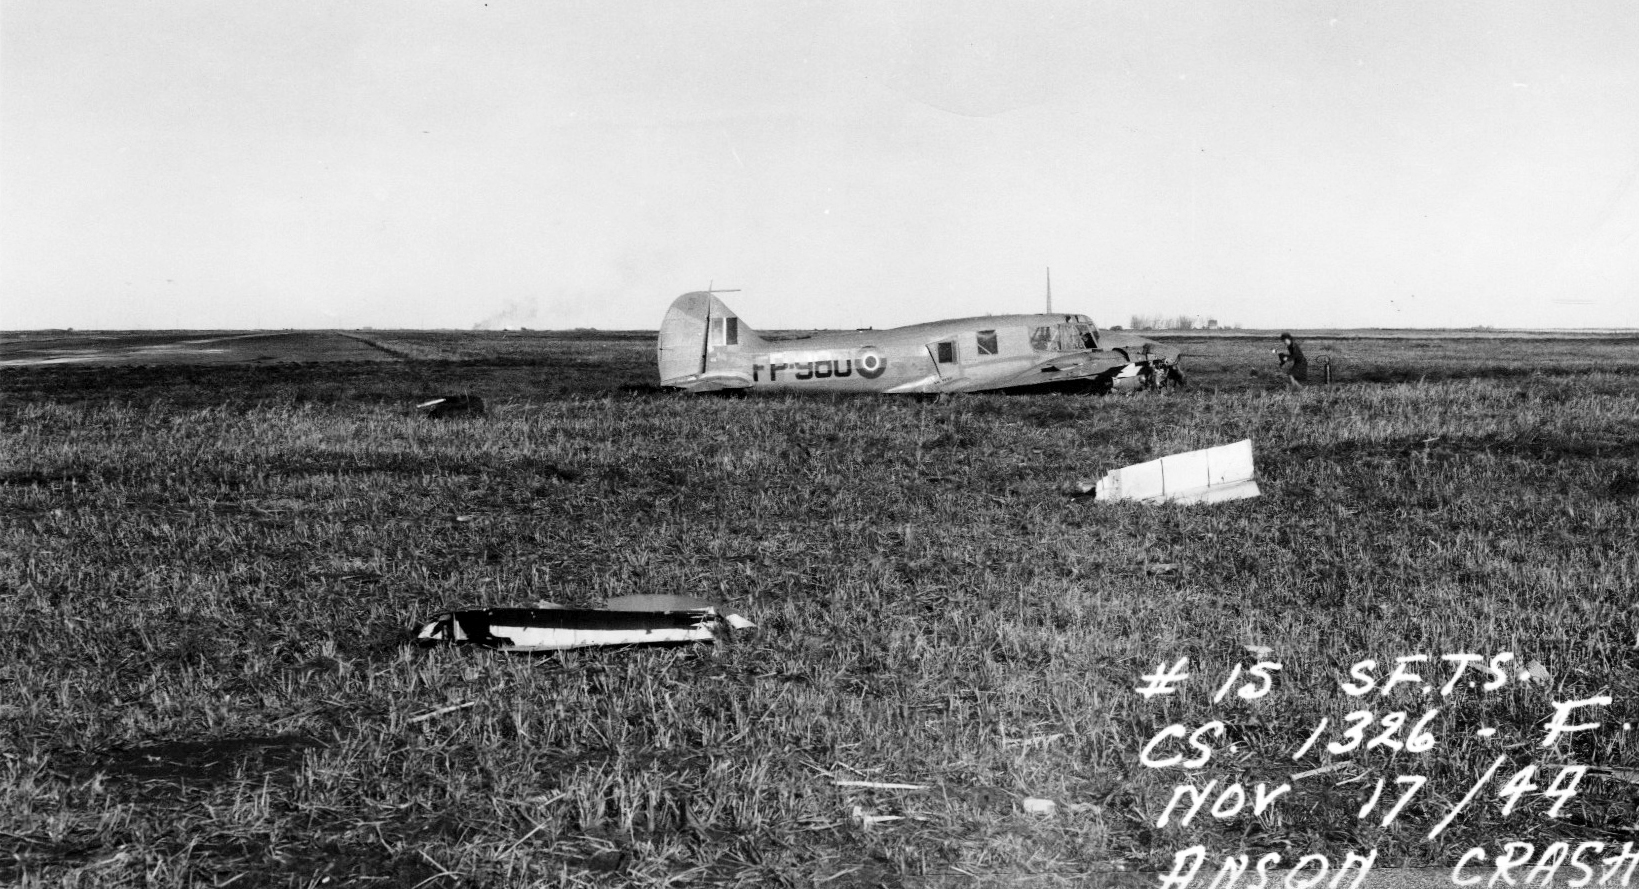 plane crash in field with airwoman taking photos